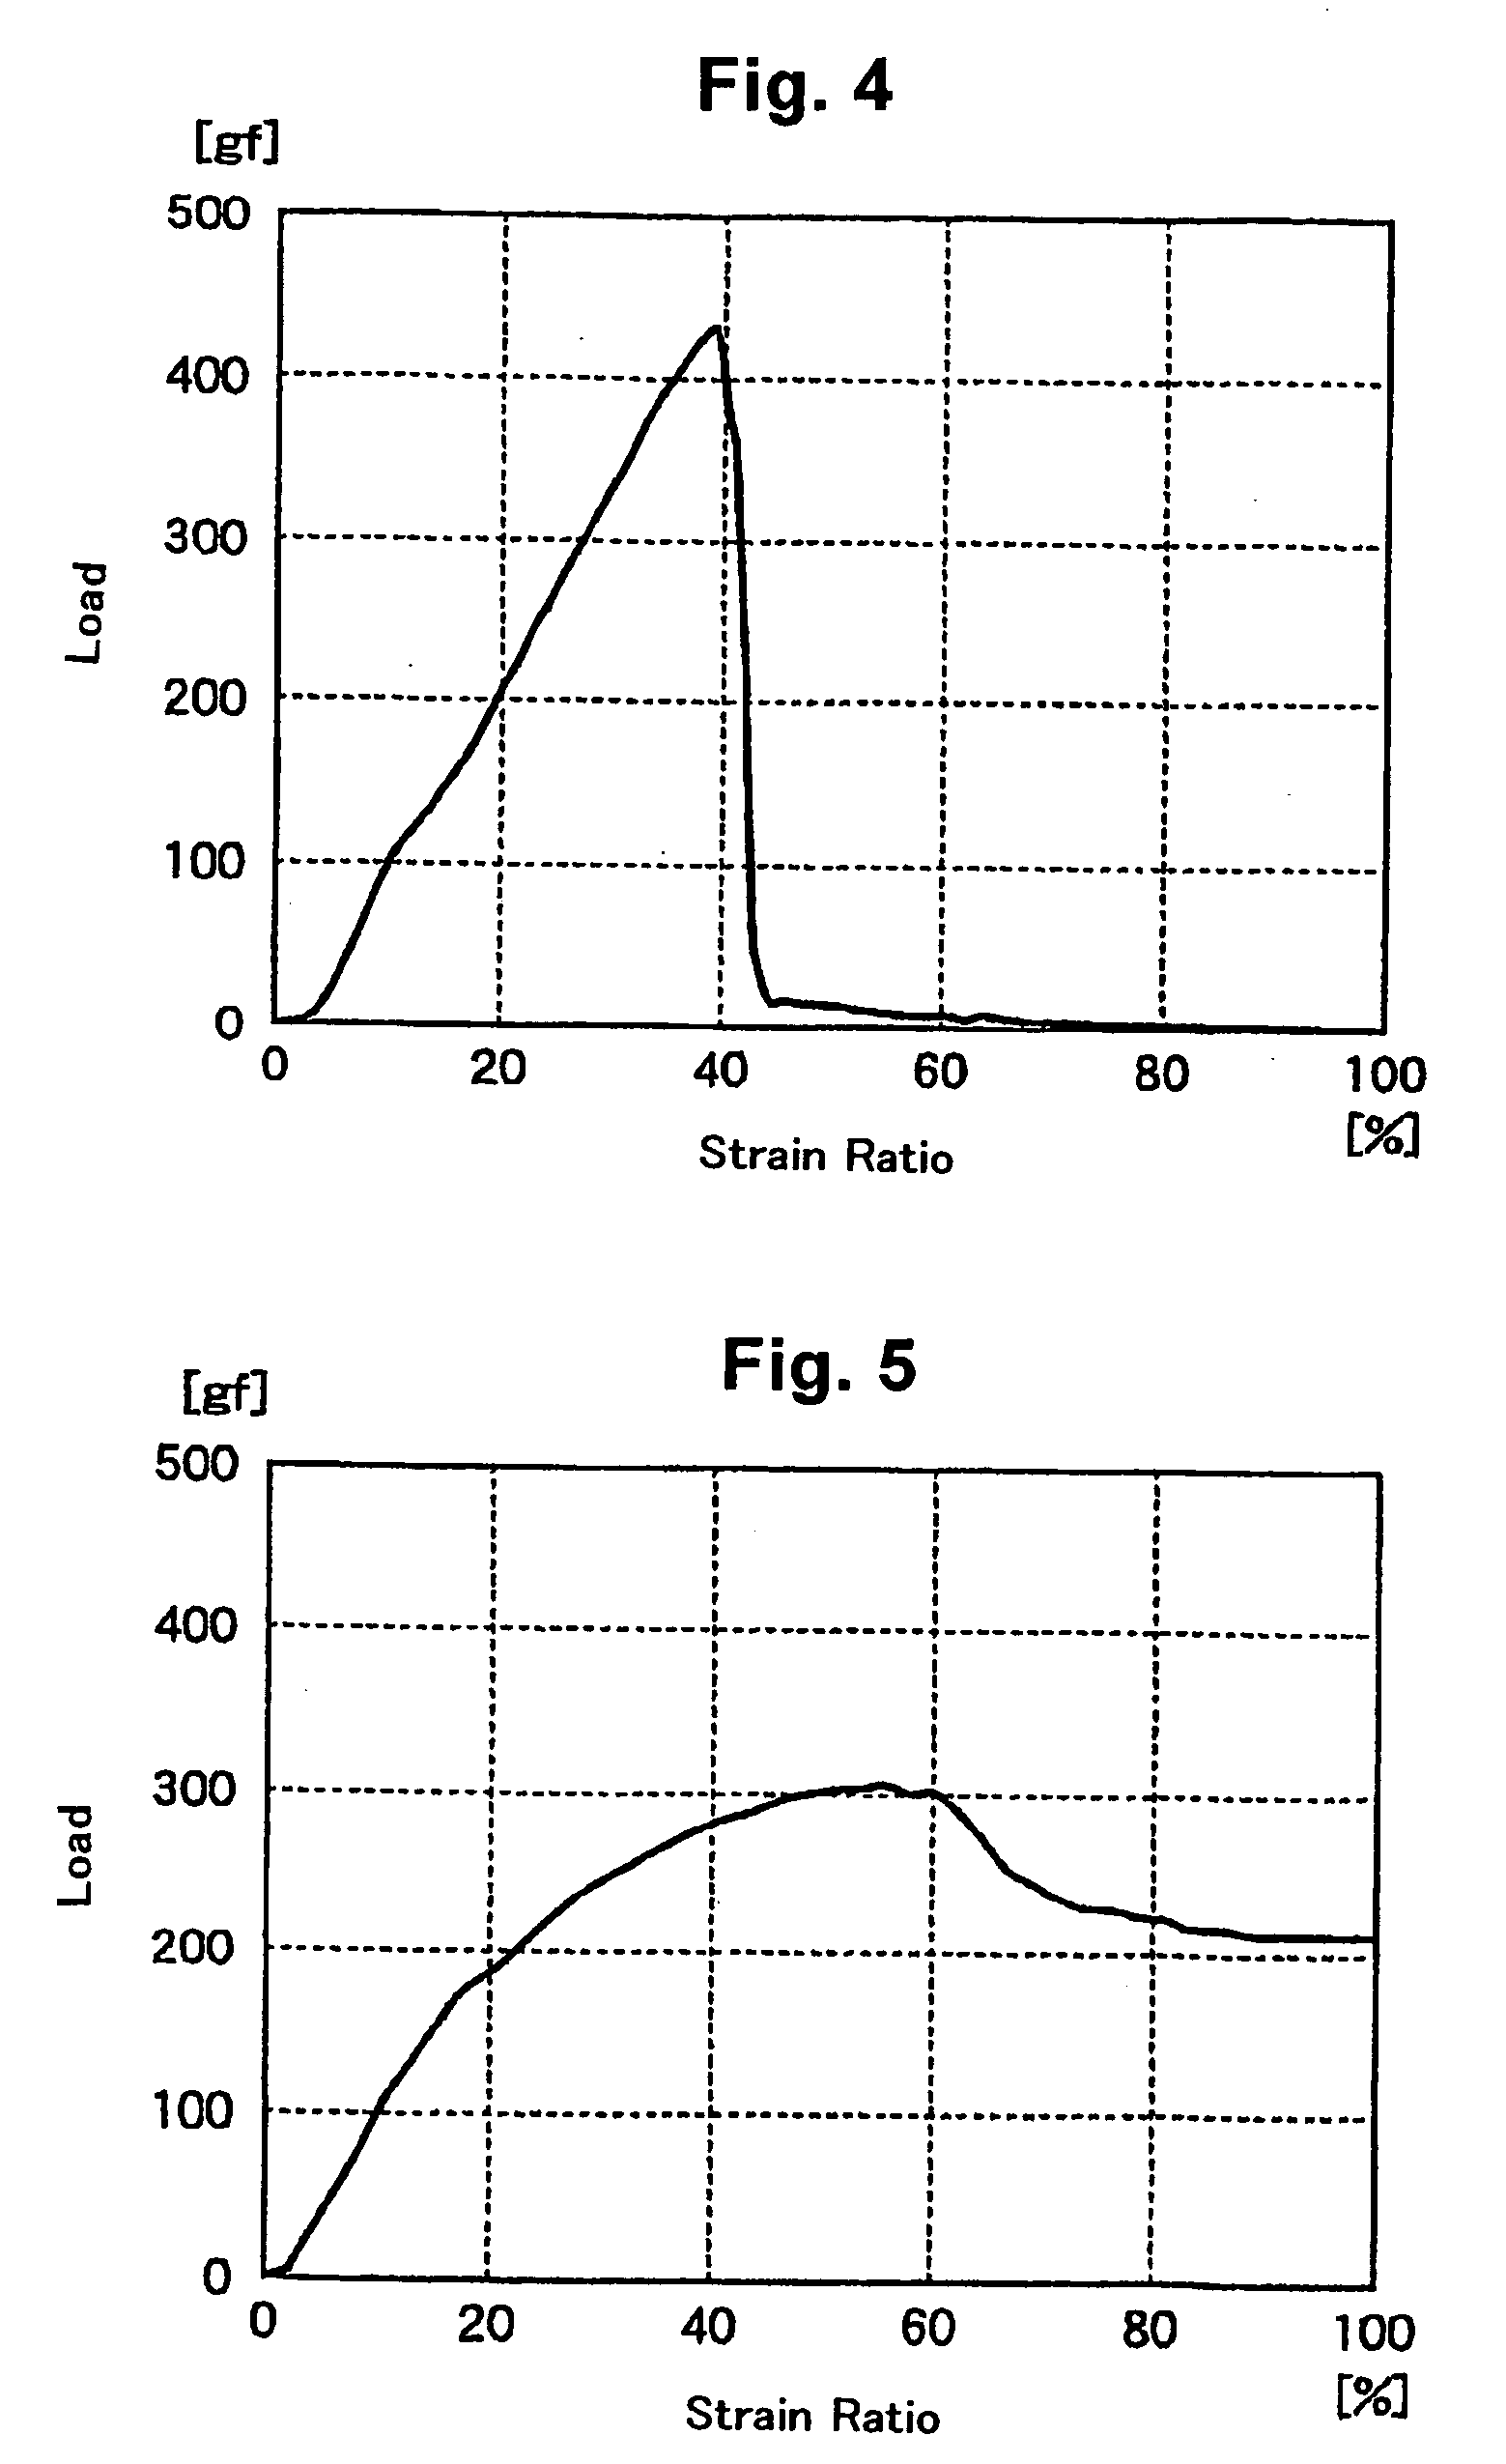 Polymer, bioabsorbable material and film for preventing tissue fusion